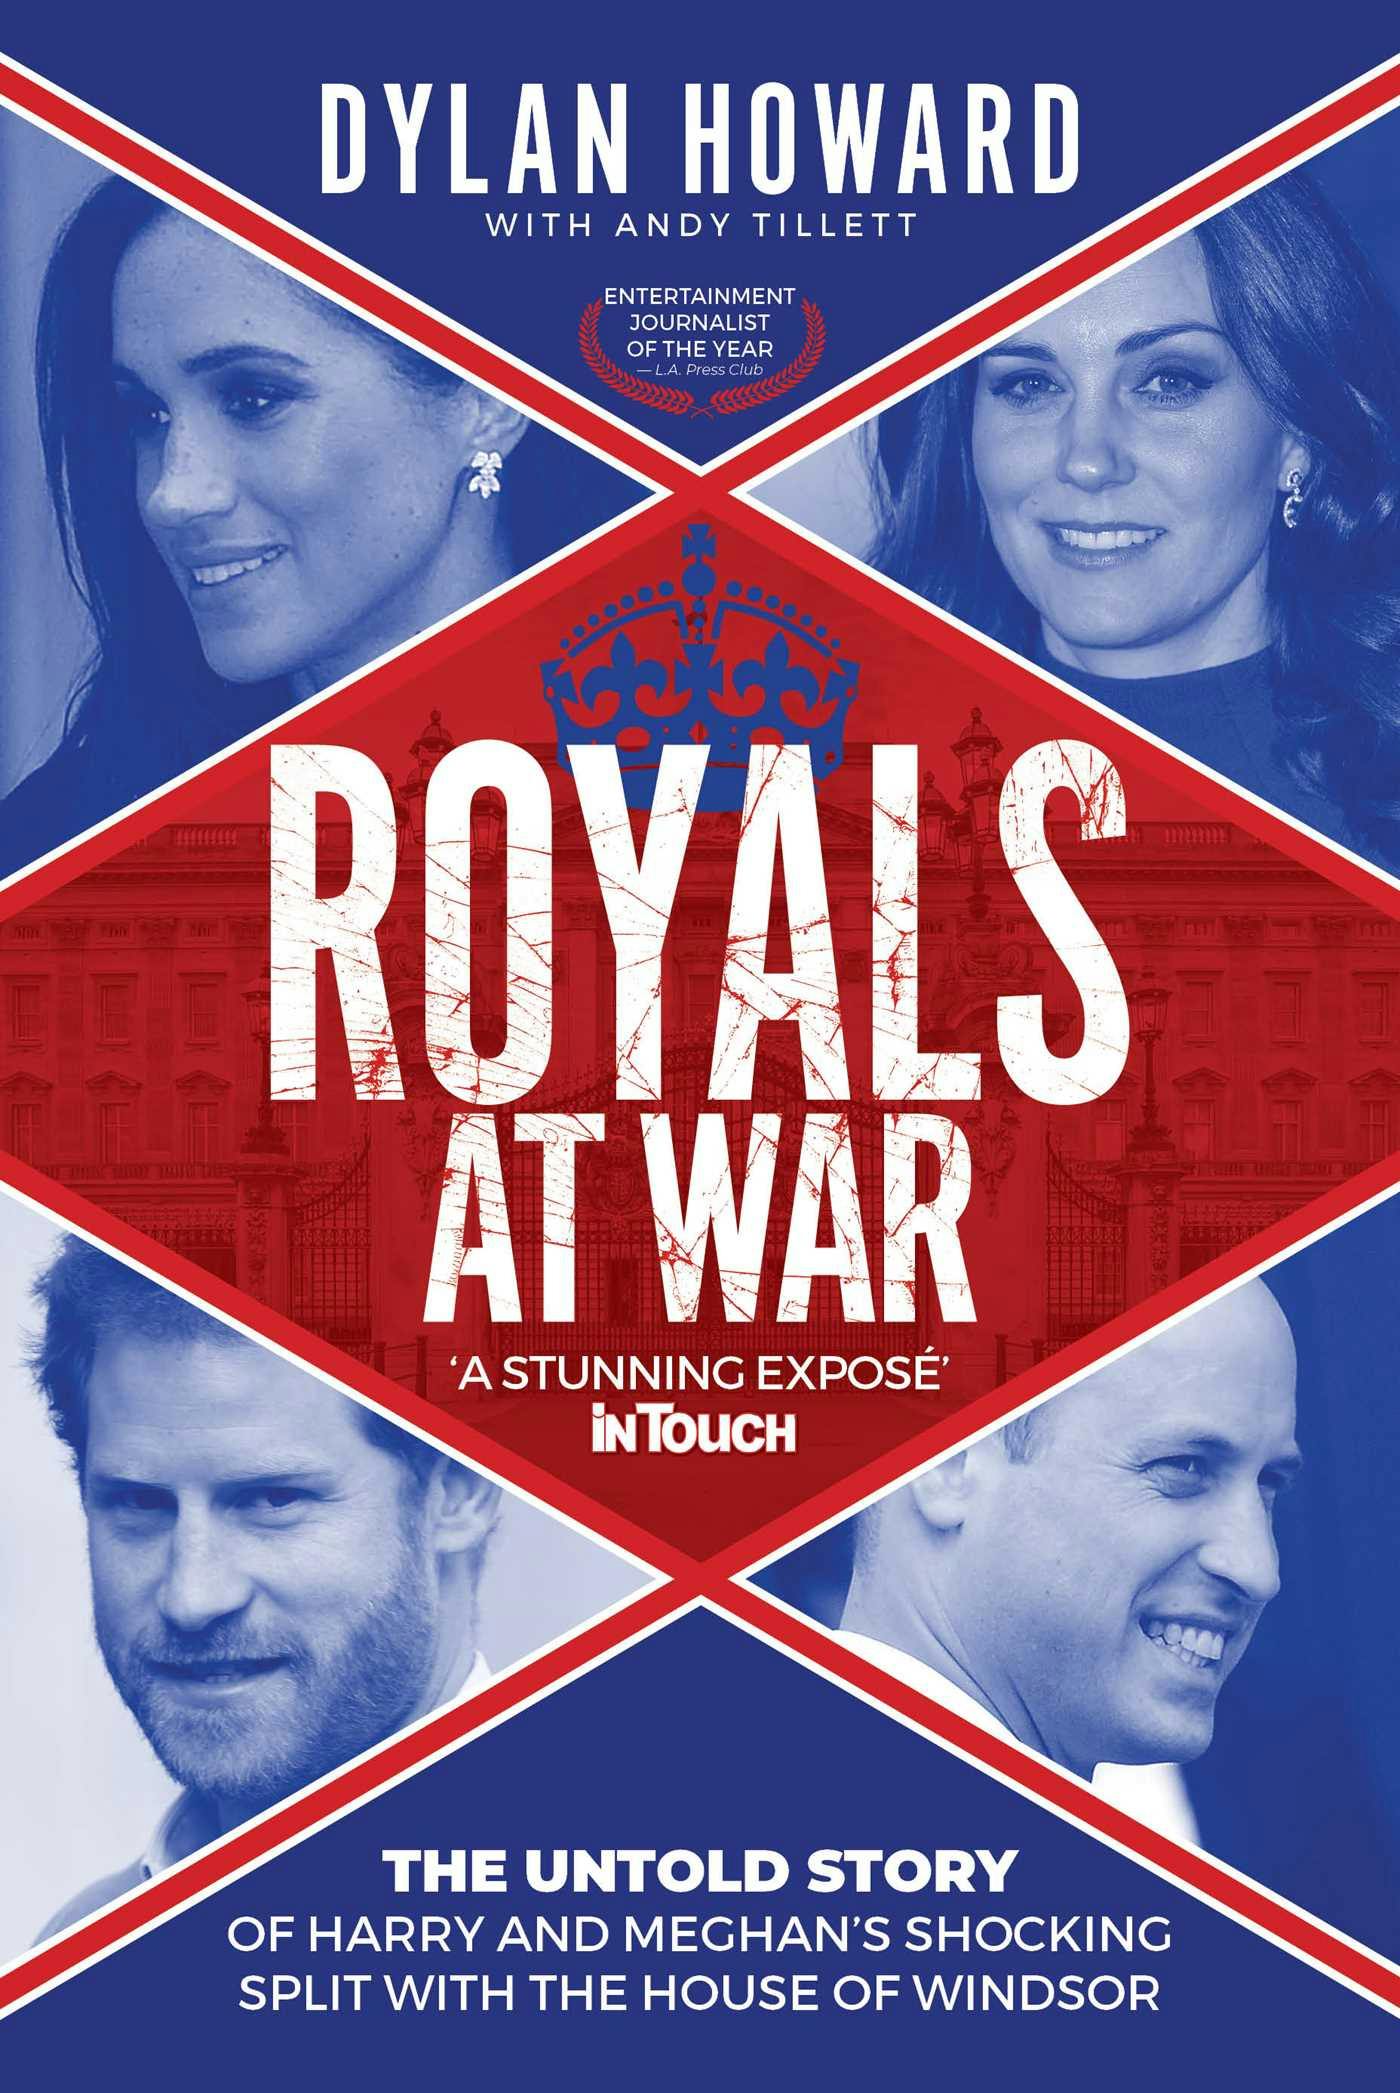 Royals at War: The Untold Story of Harry and Meghan's Shocking Split with the House of Windsor - Dylan Howard, Andy Tillett